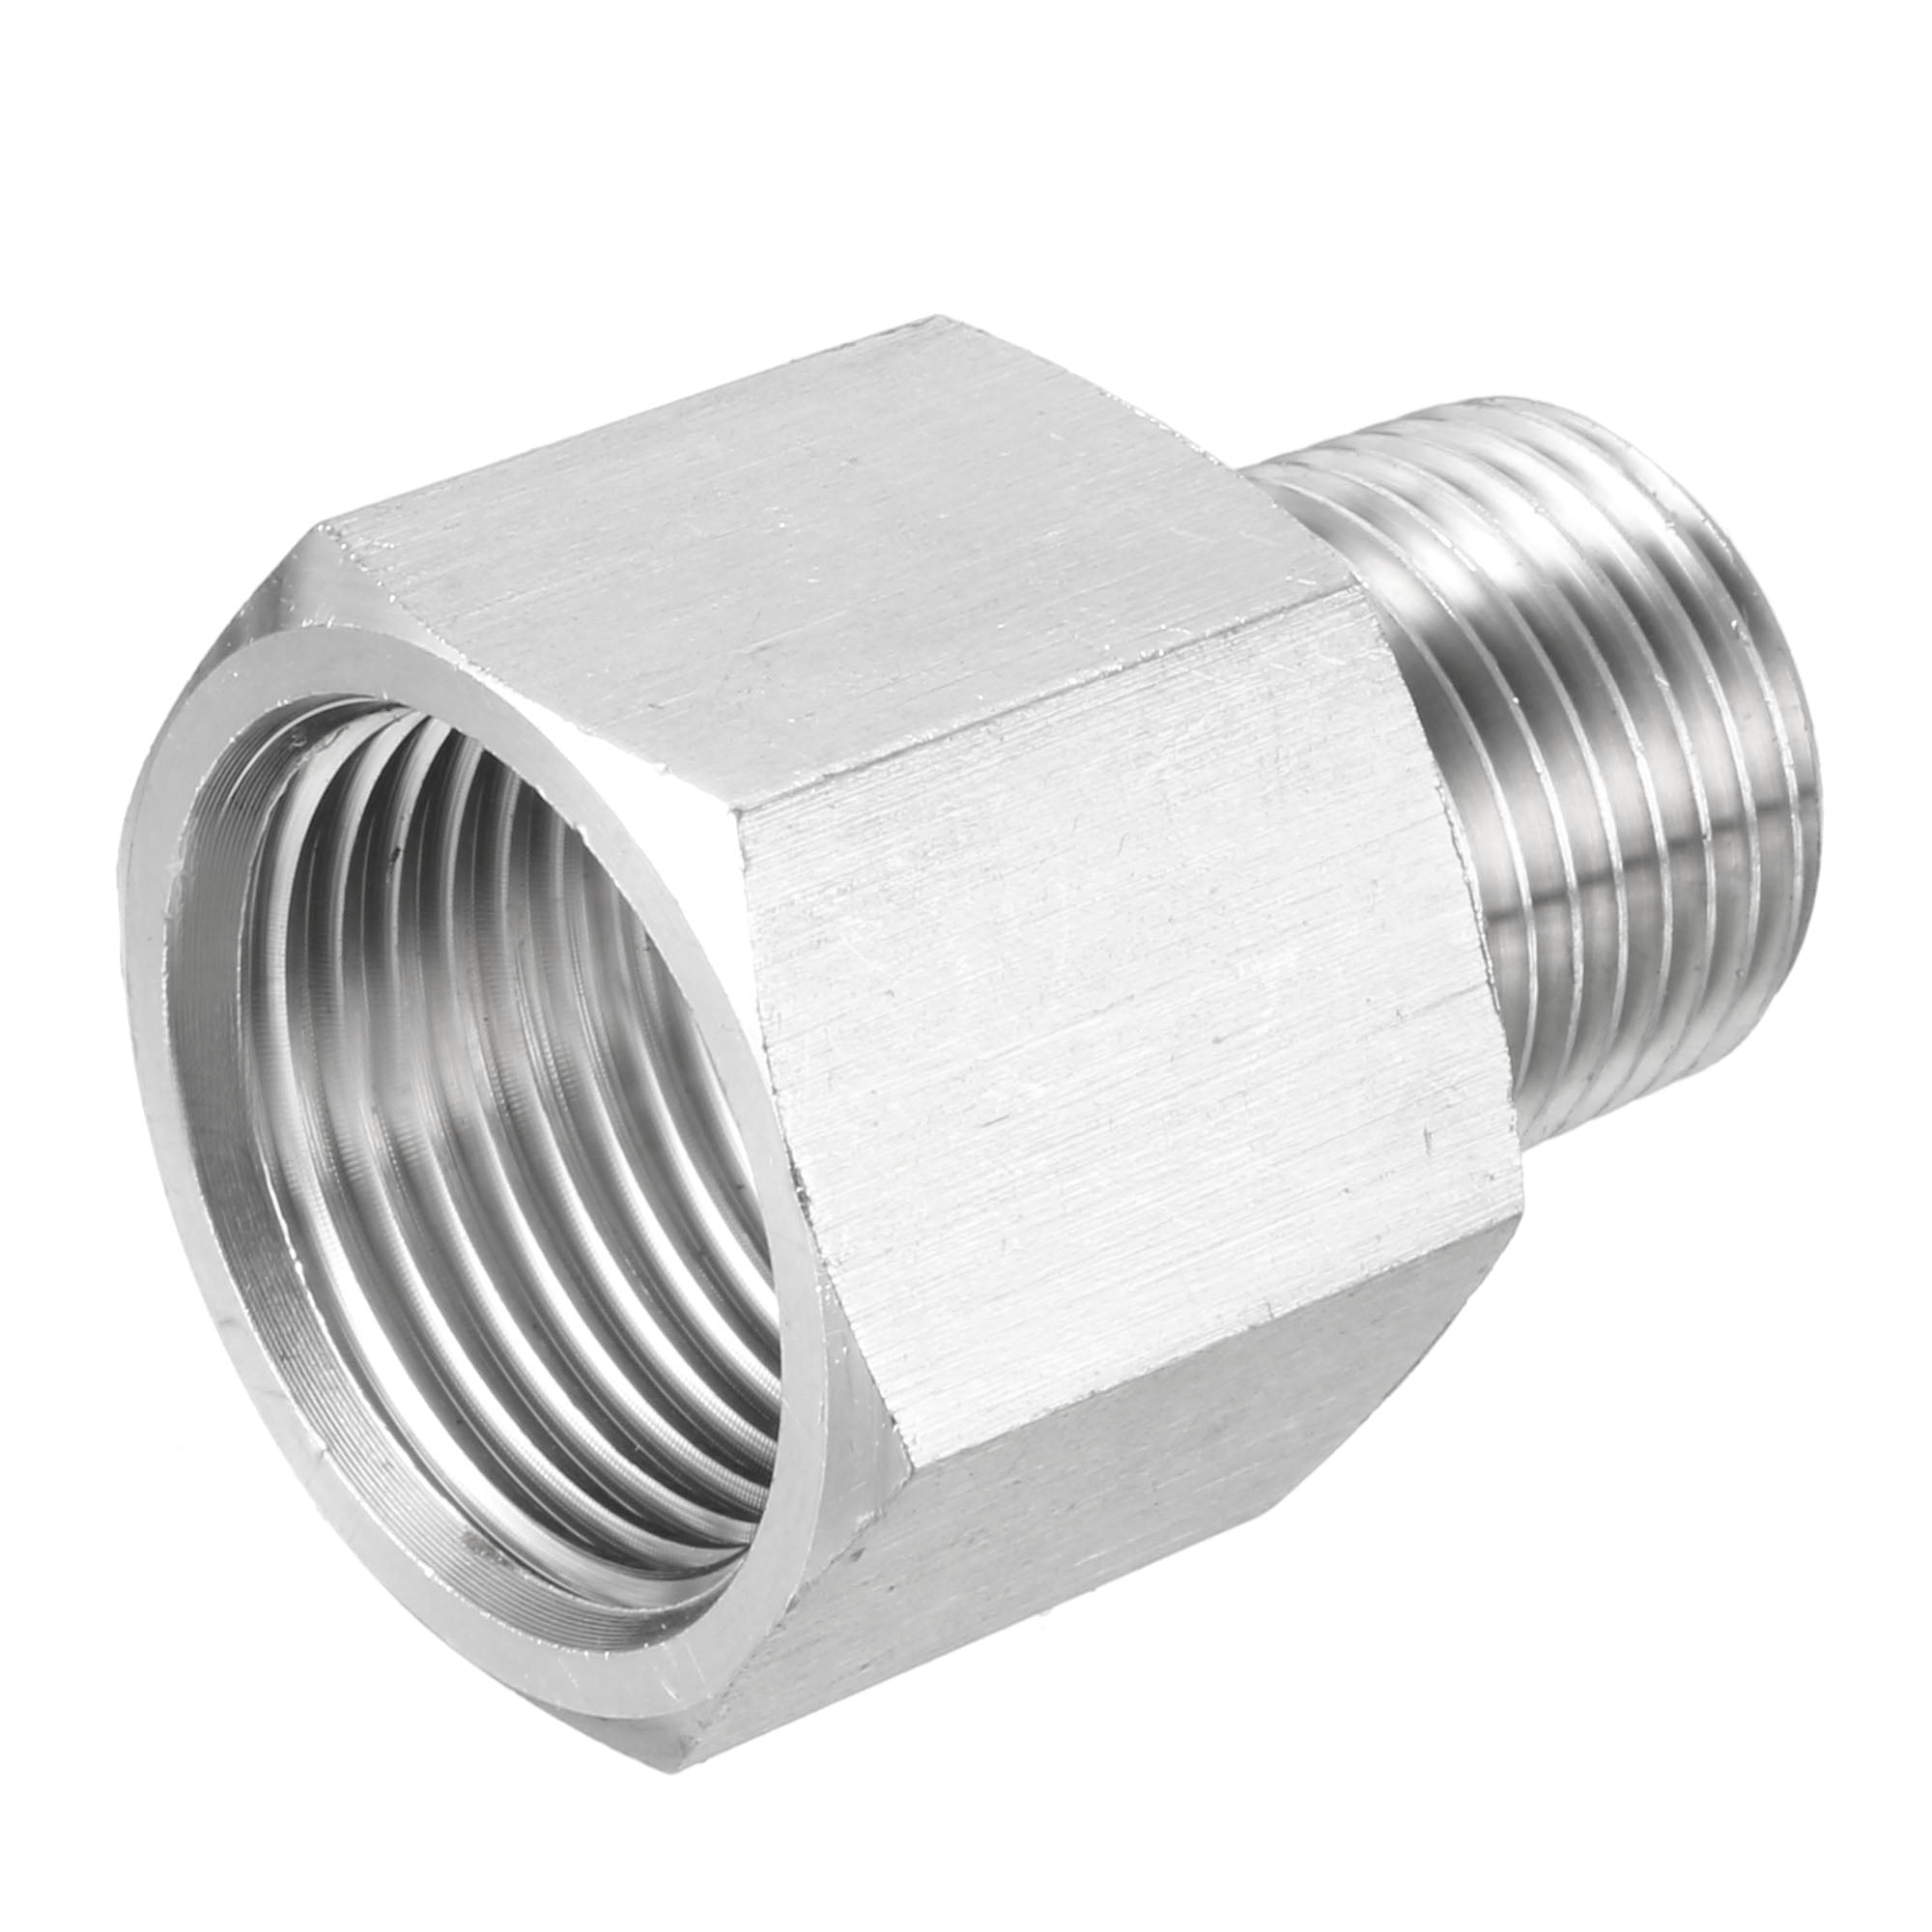 4 AN Female  adapter Fitting Adapter With 1/8" NPT gauge port 4 AN Male to 